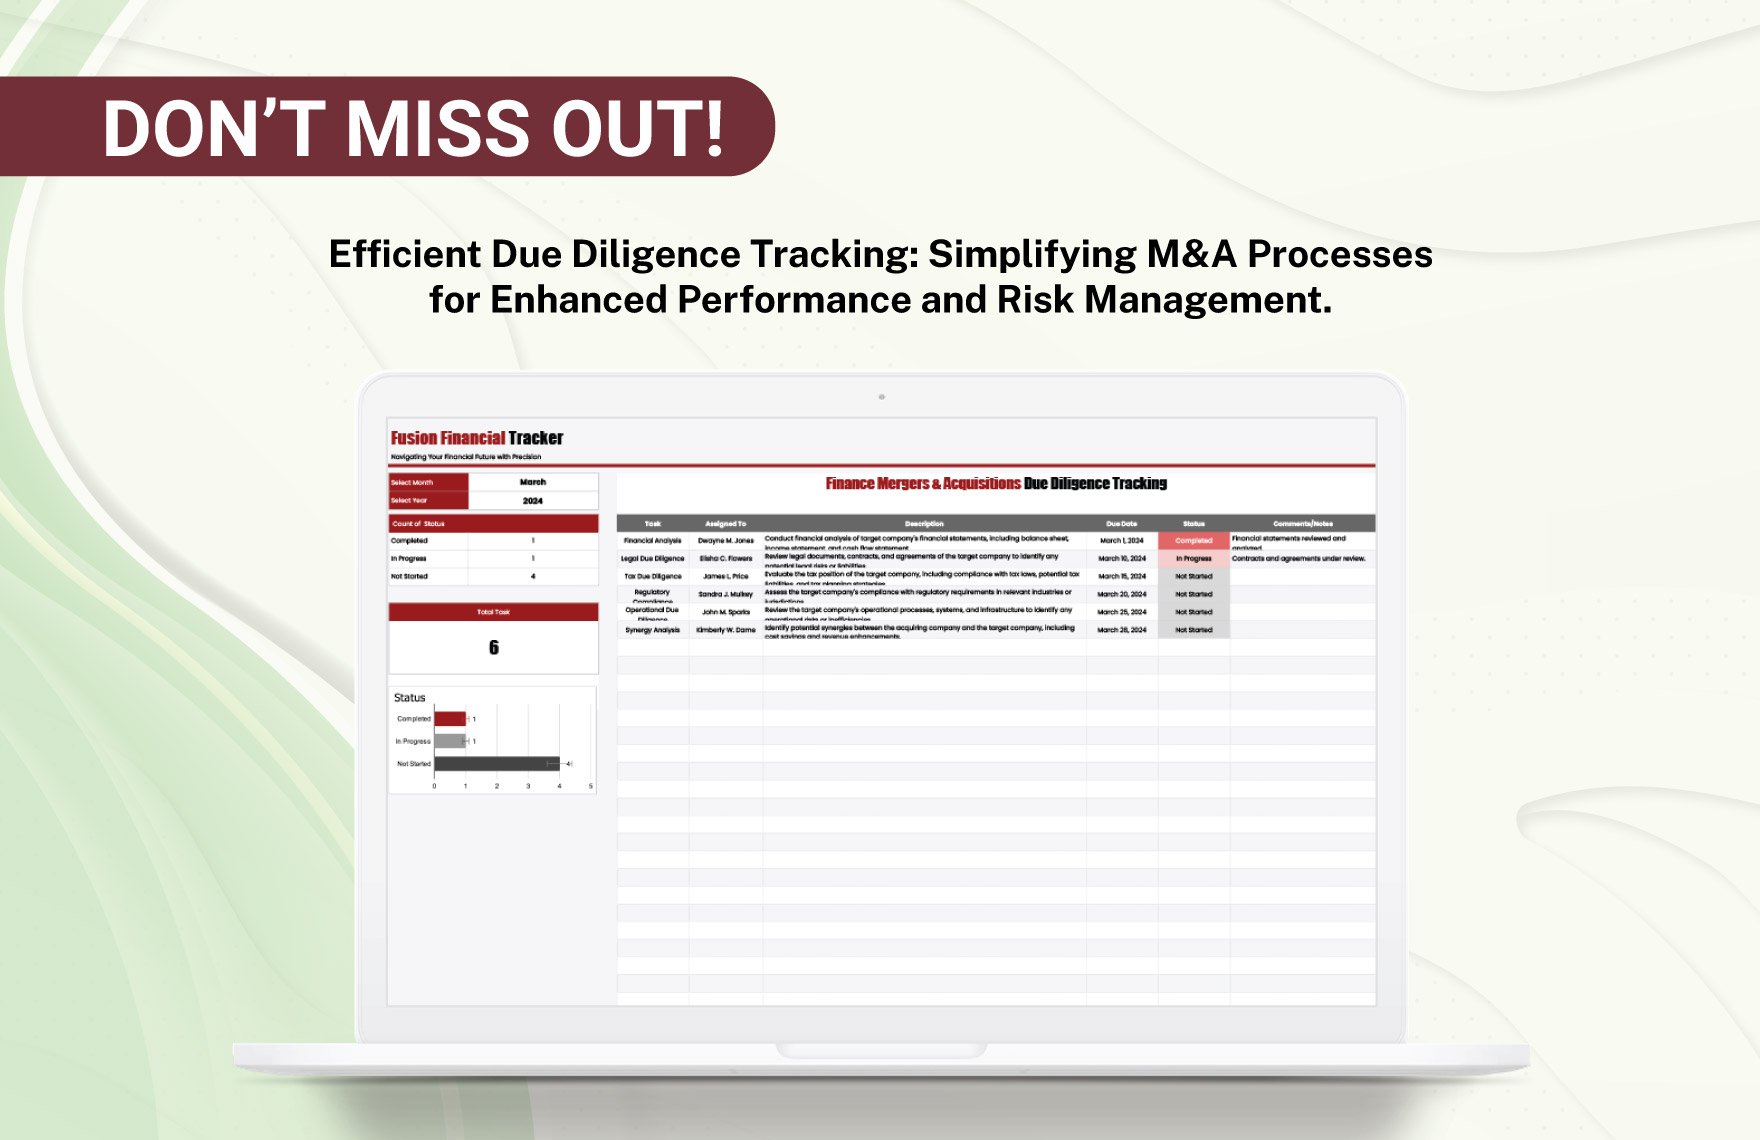 Finance Mergers & Acquisitions Due Diligence Tracking Template